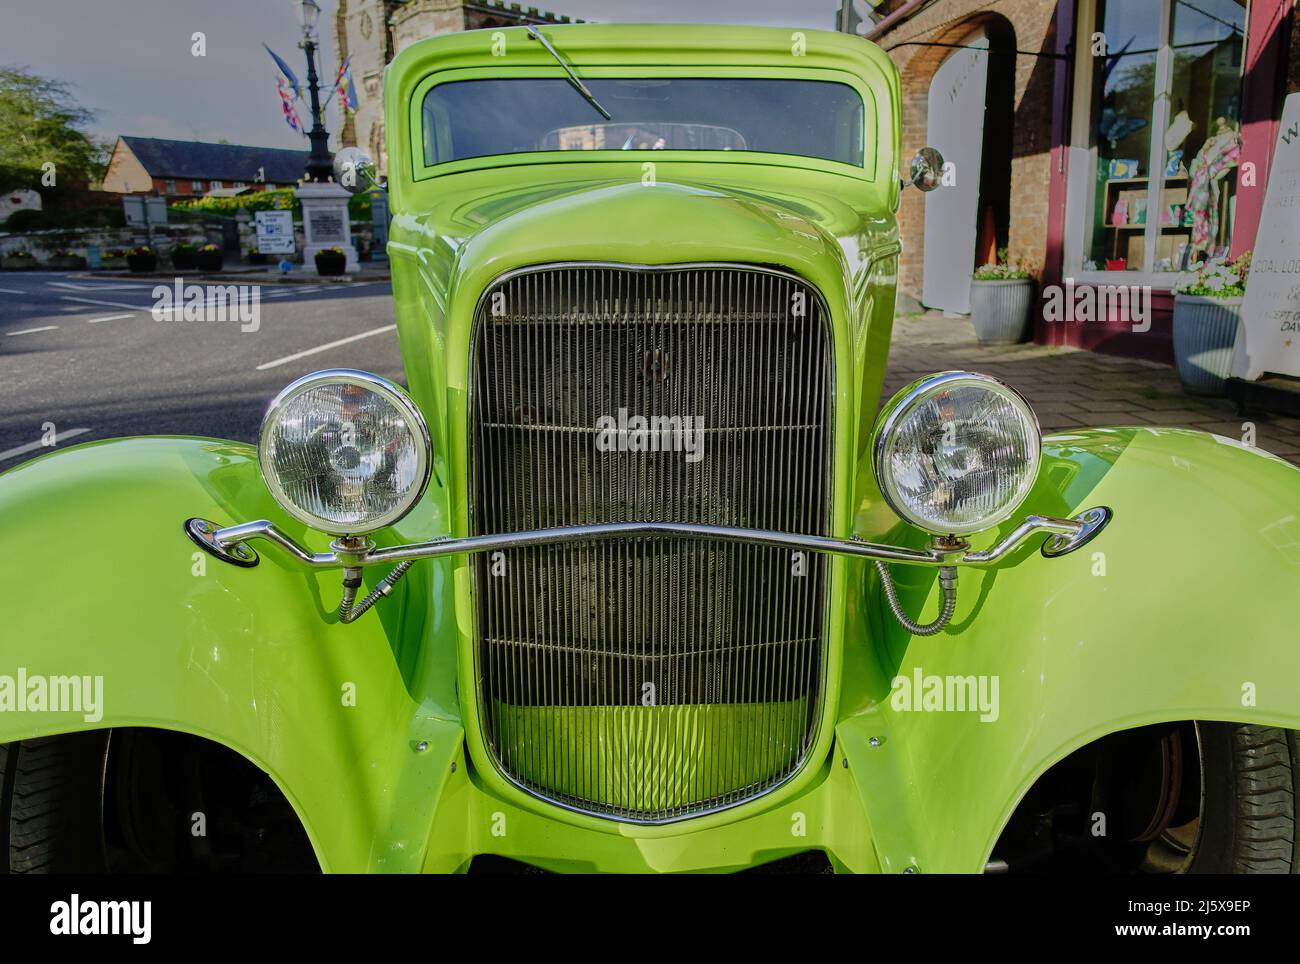 View of a vivid green American style hot rod showing the grille and headlights Stock Photo